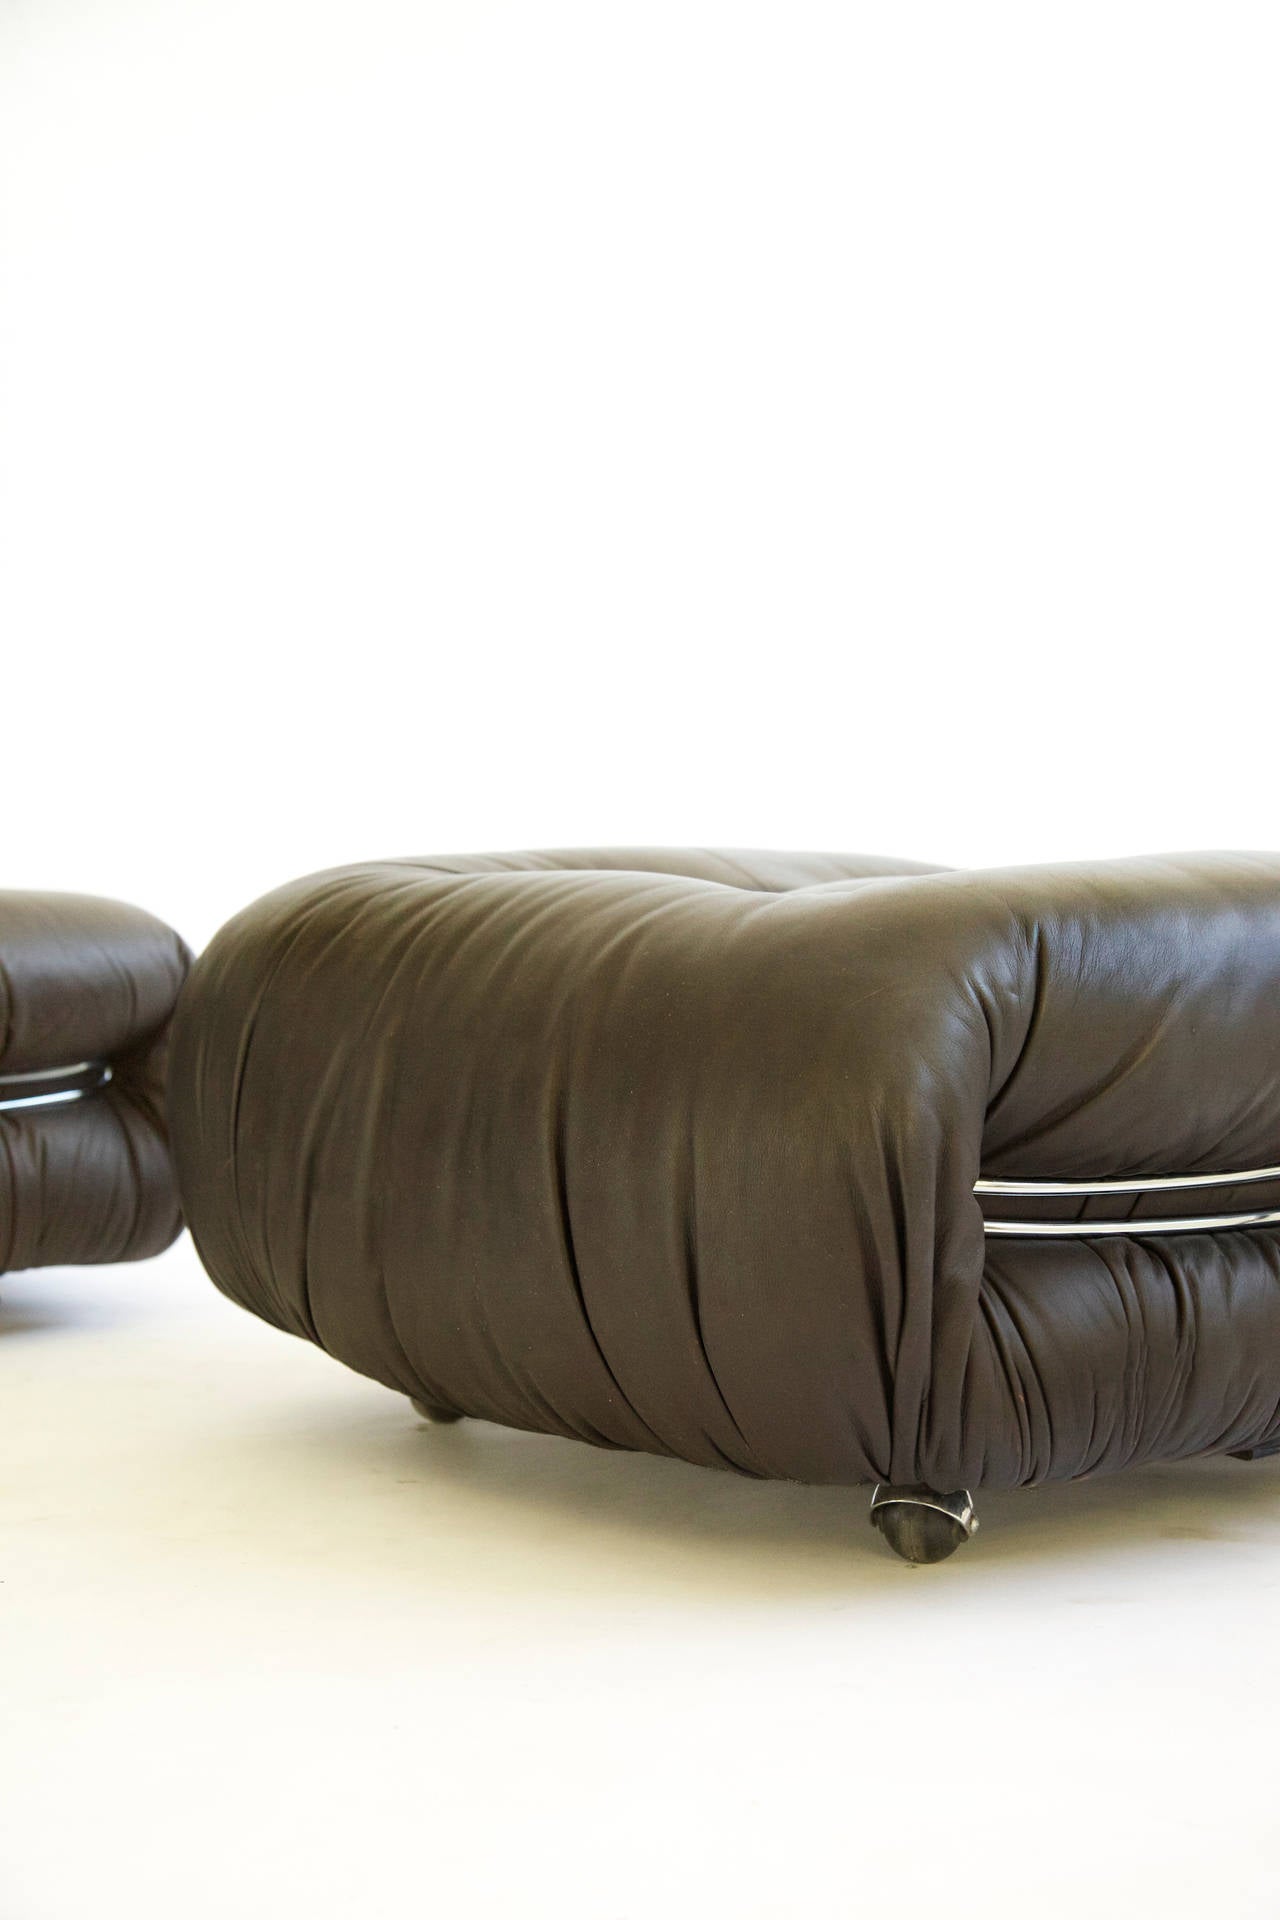 Plated Pair of Scarpa Rolling Ottomans/Poofs